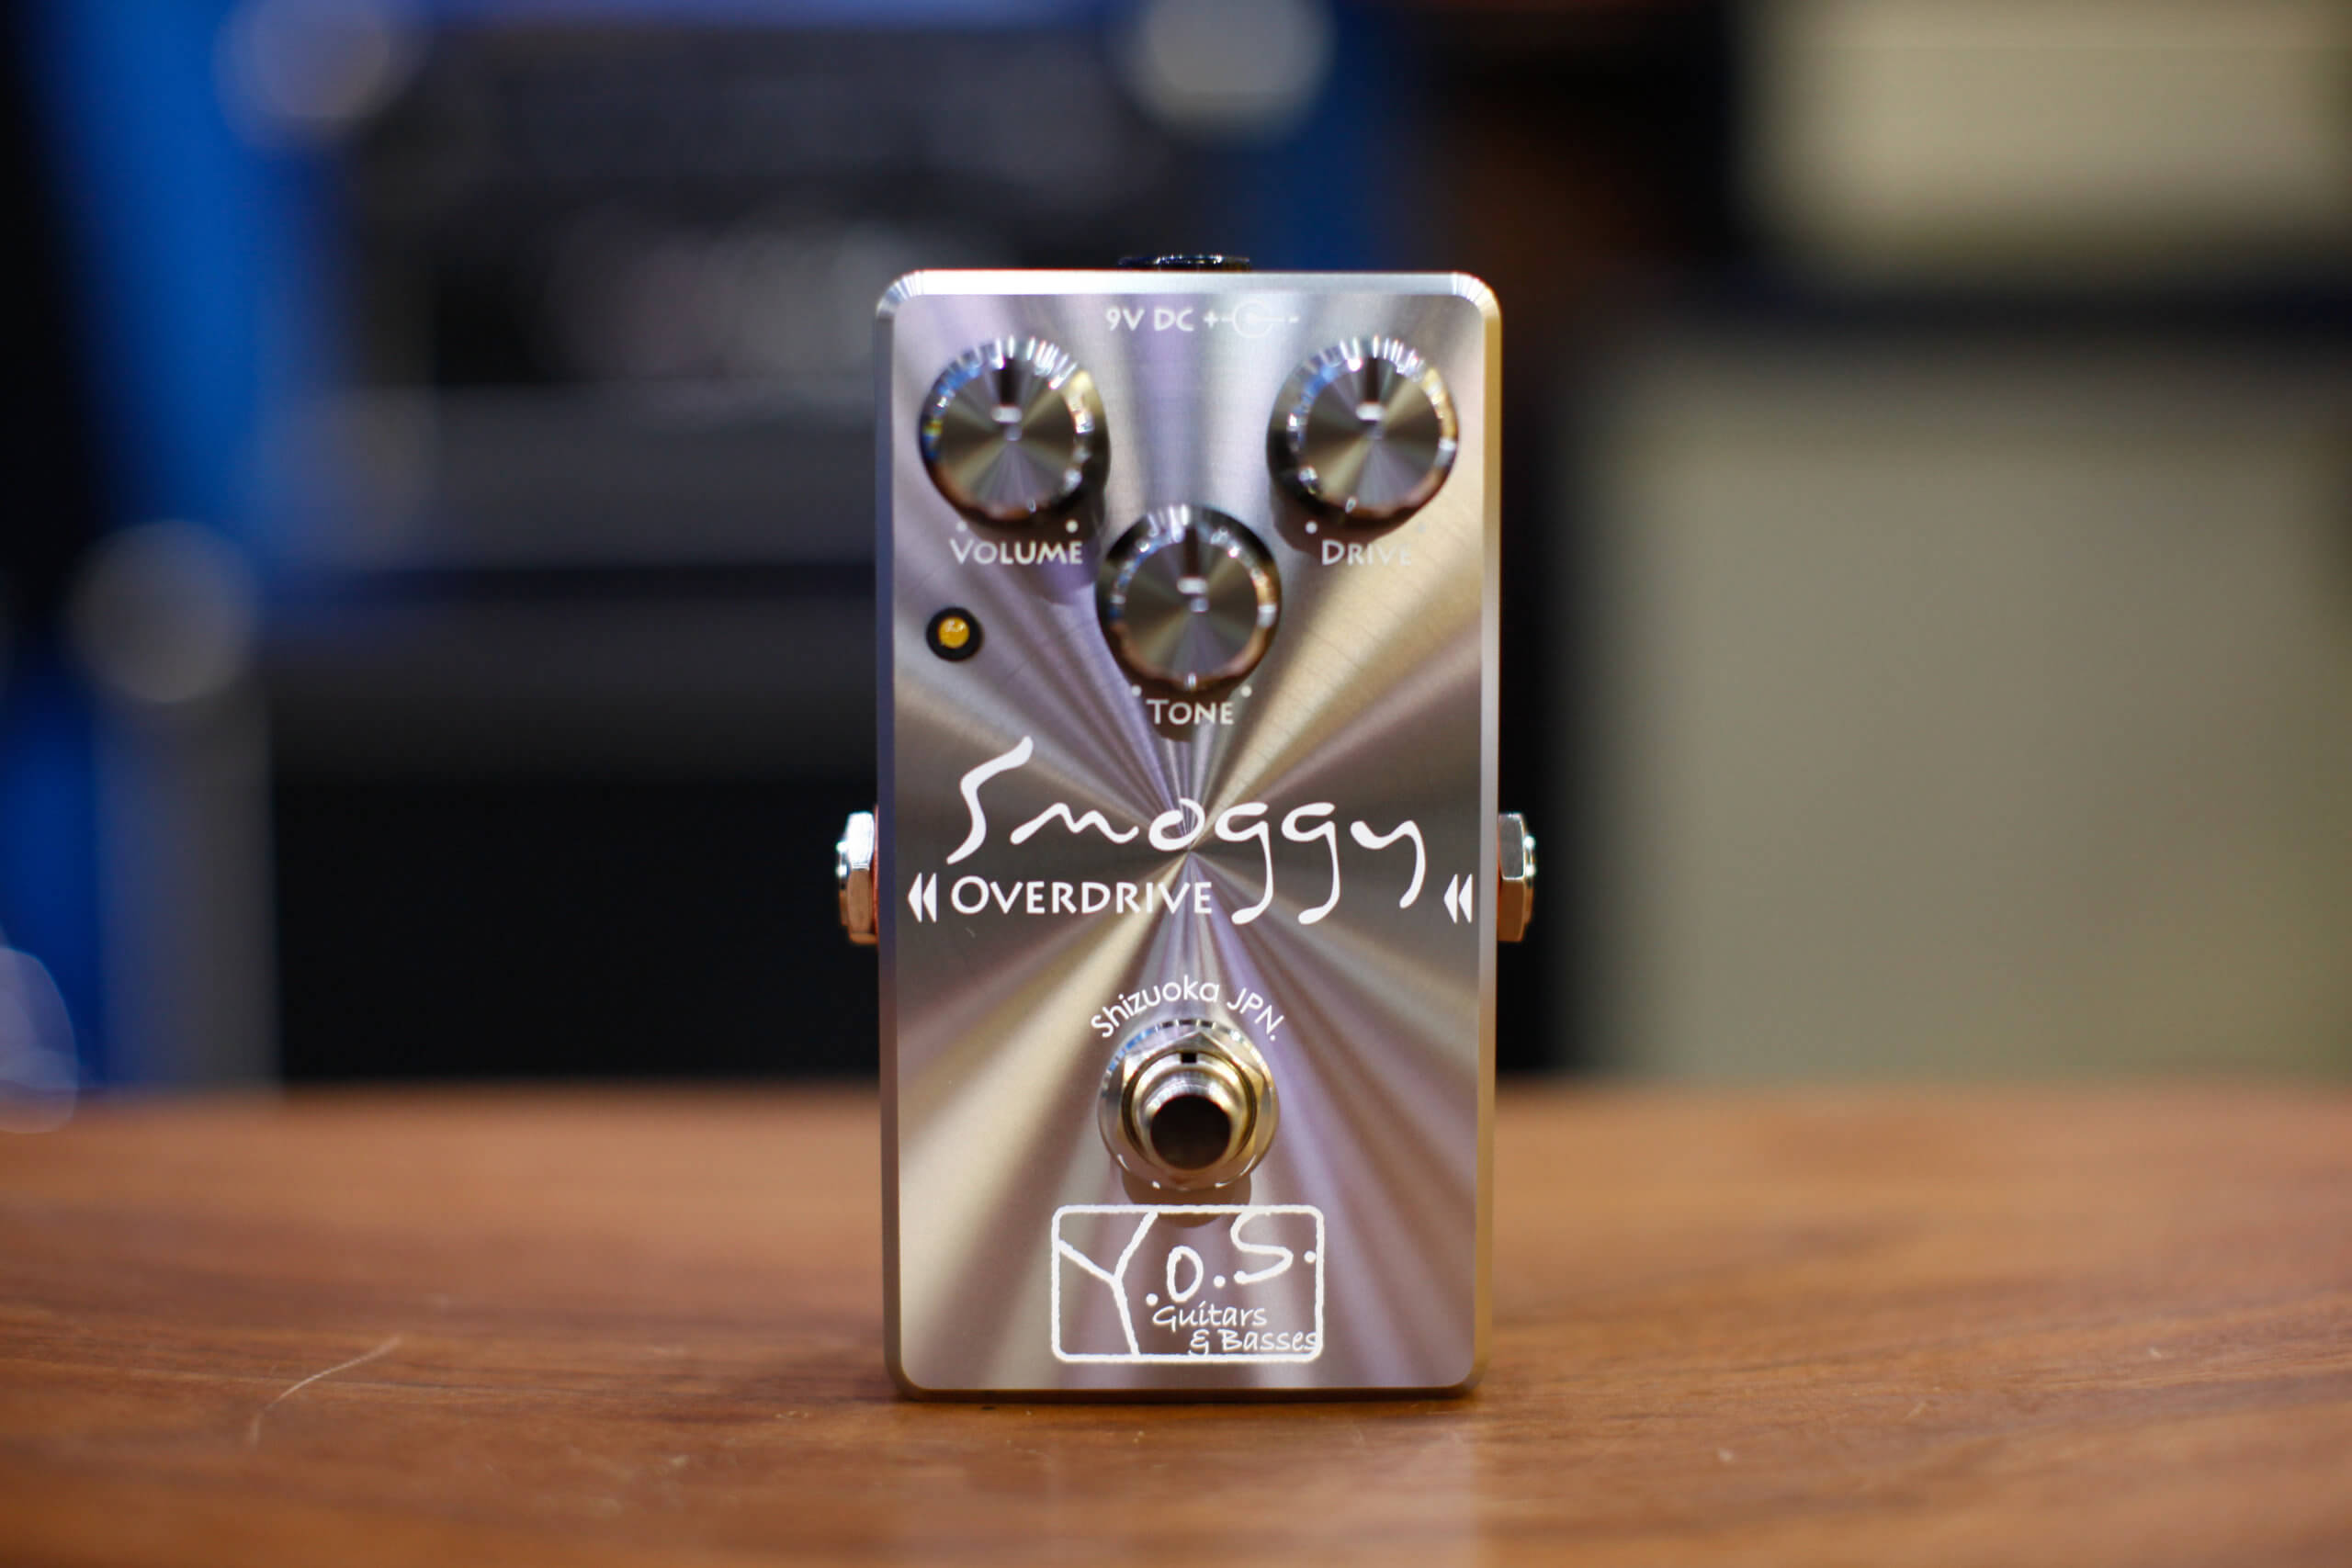 Y.O.S smoggy overdrive シリアル400番台-